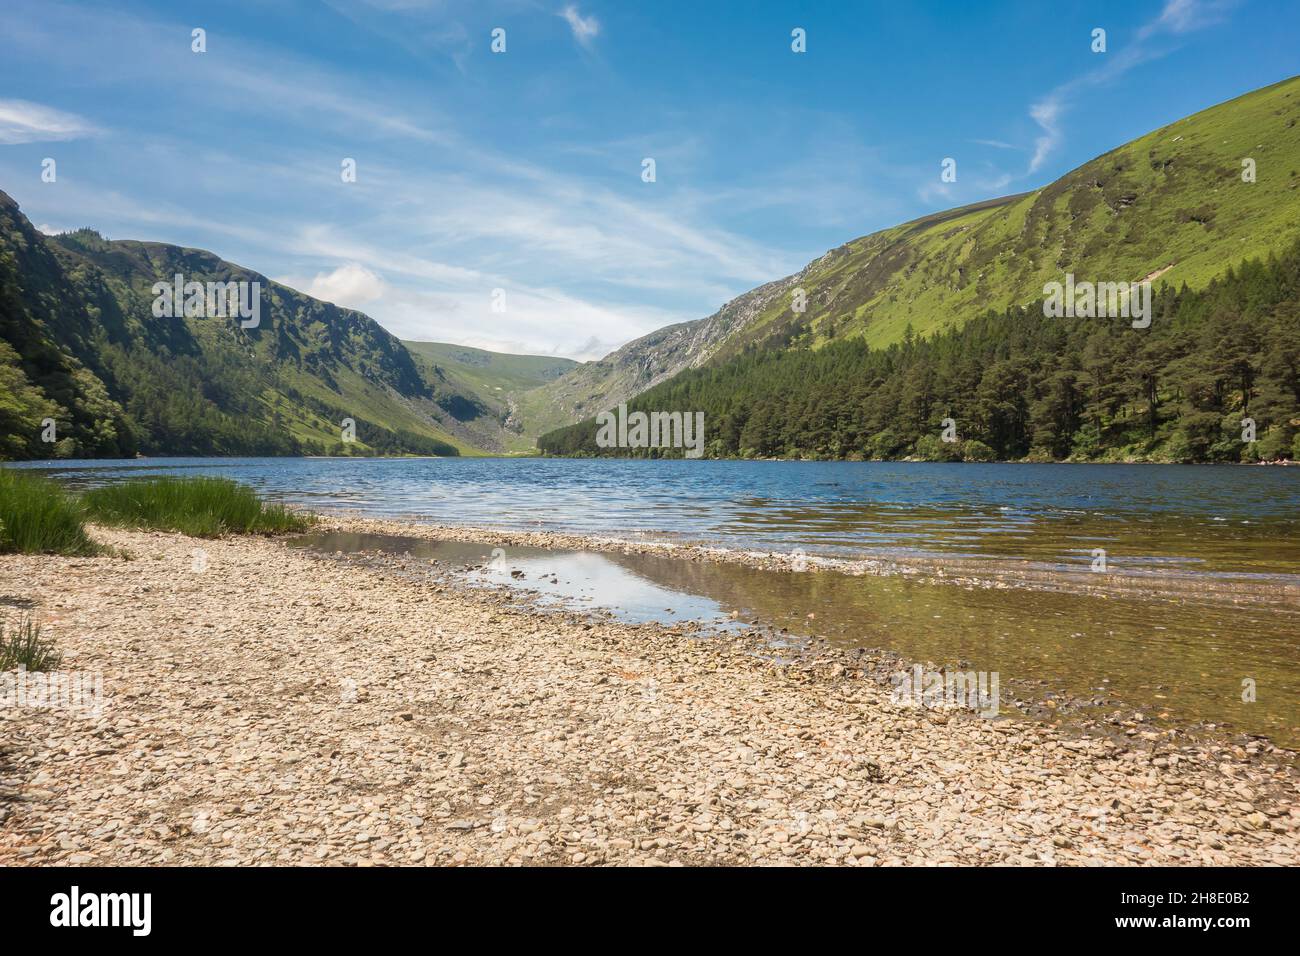 View of the Upper lake at Glendalough National Park, County Wicklow, Ireland. Stock Photo